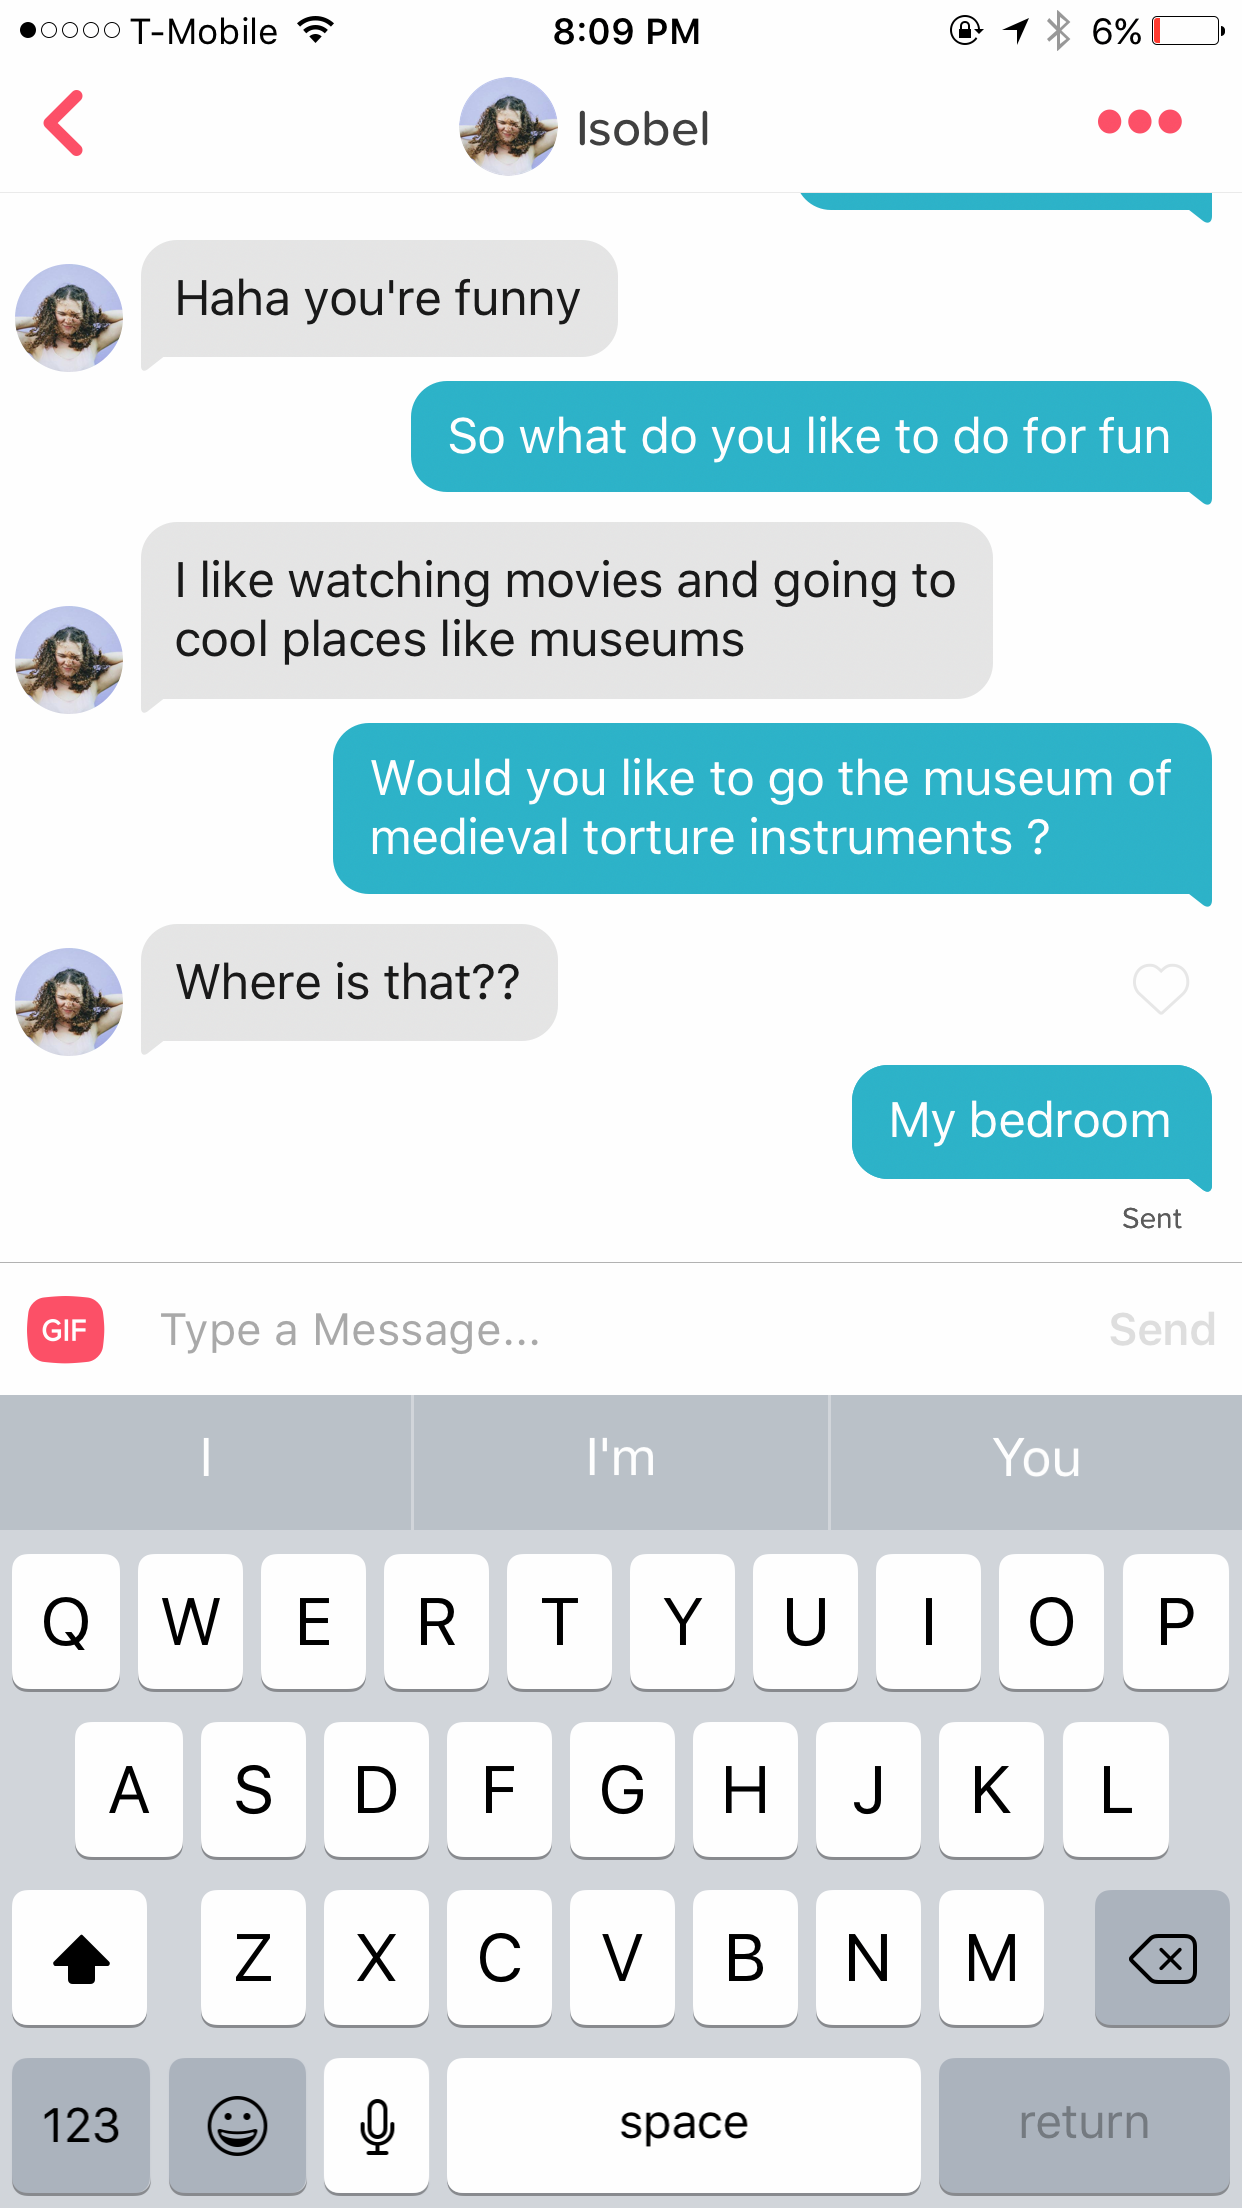 funny tinder texts - .600 TMobile 16% 0 Isobel Haha you're funny So what do you to do for fun I watching movies and going to cool places museums Would you to go the museum of medieval torture instruments? Where is that?? My bedroom Gif Send Type a Message